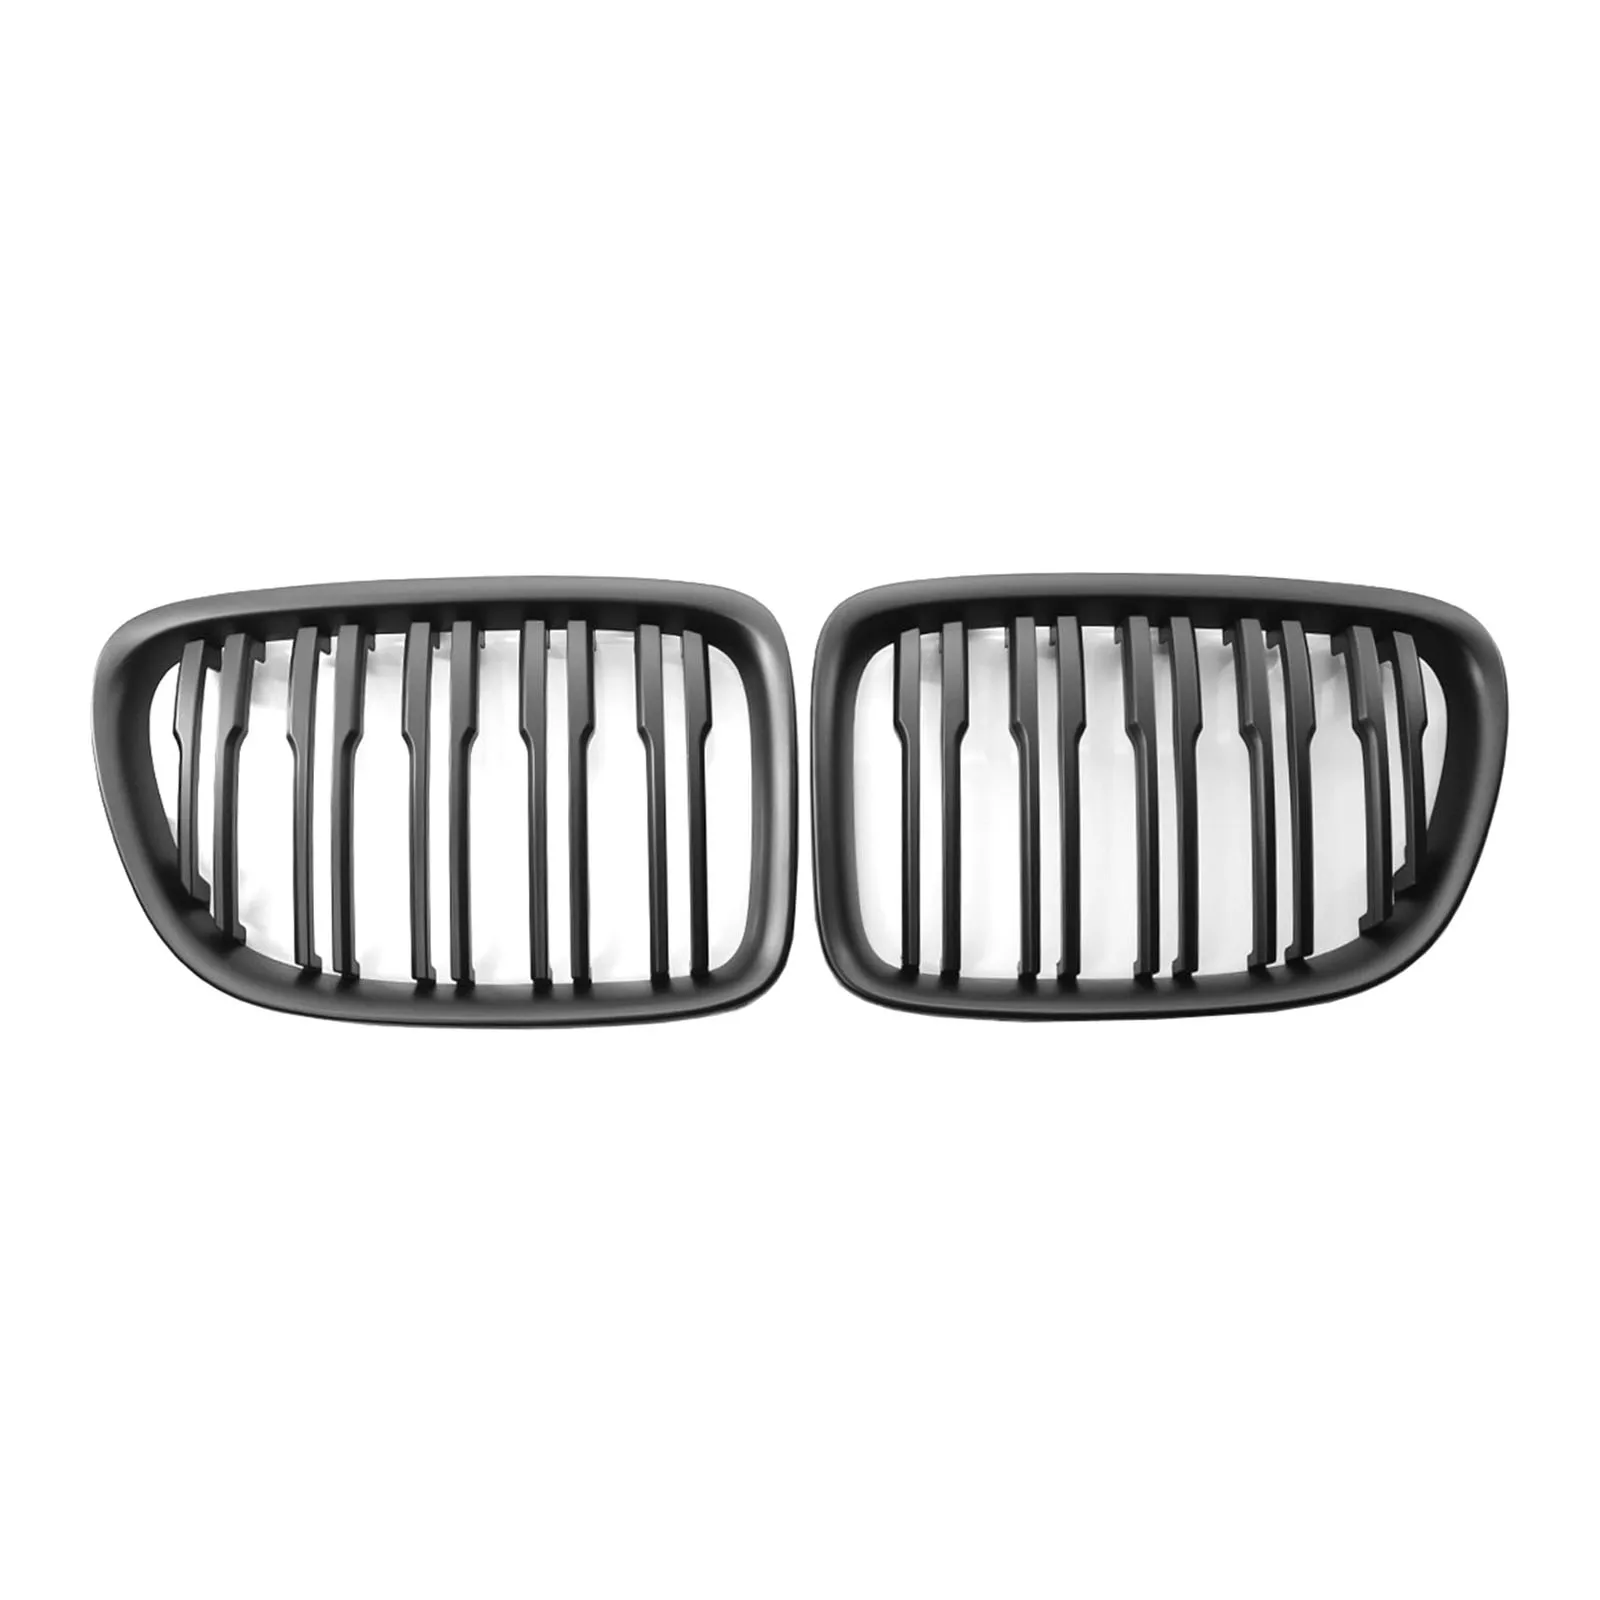 Grille Front for  E84 18i 28i 2009 2015 2011 Bumper Replace Mesh Matte